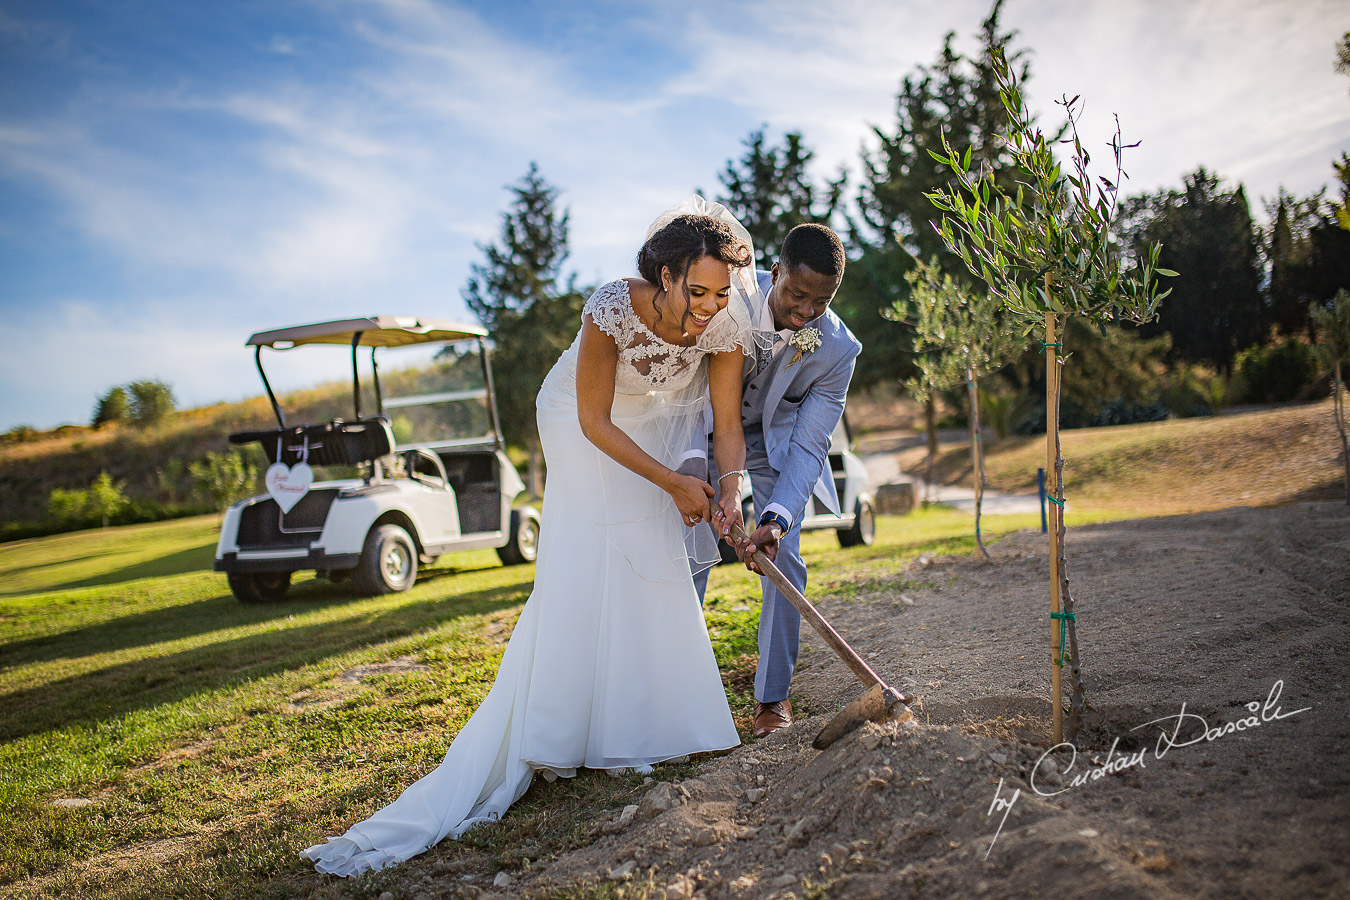 Bride and groom planting an olive tree, moments captured at a wedding at Minthis Hills in Cyprus, by Cristian Dascalu.